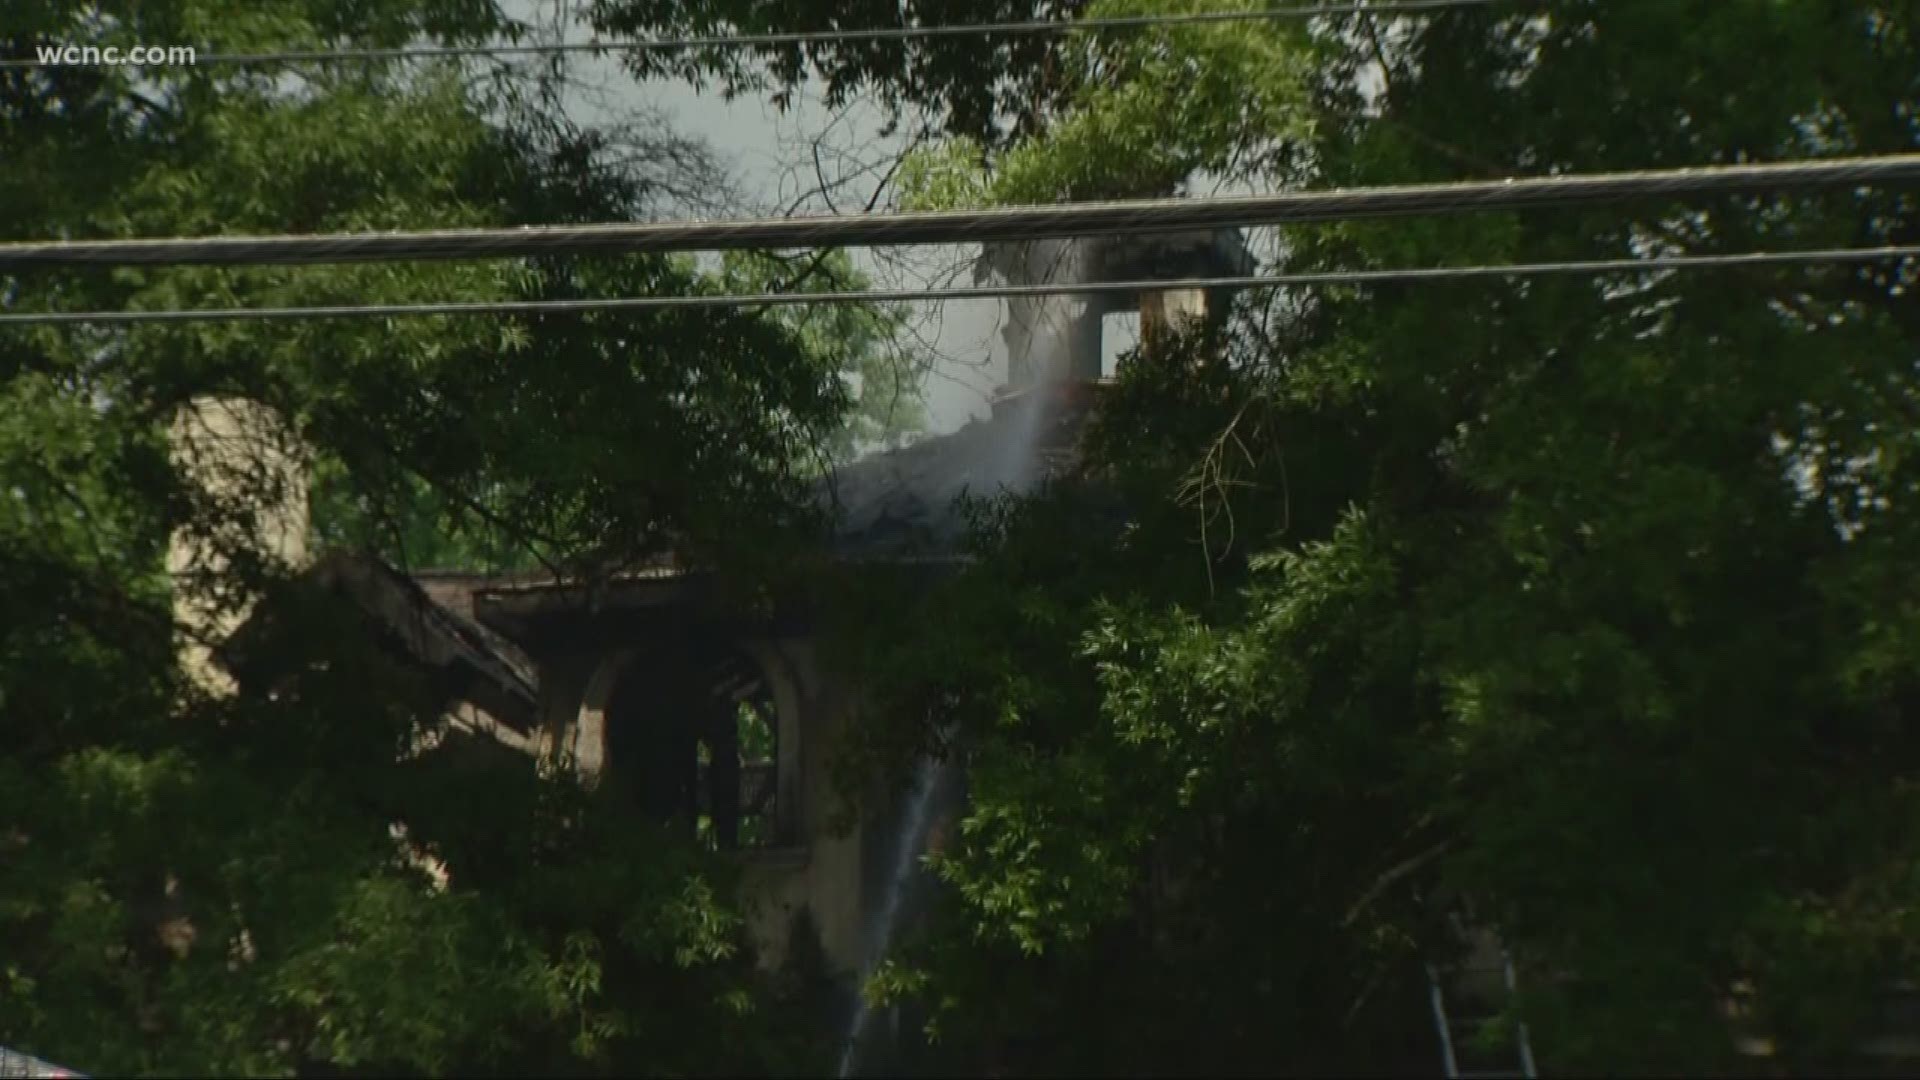 It took 27 firefighters about 16 minutes to control the fire, according to Charlotte Fire.